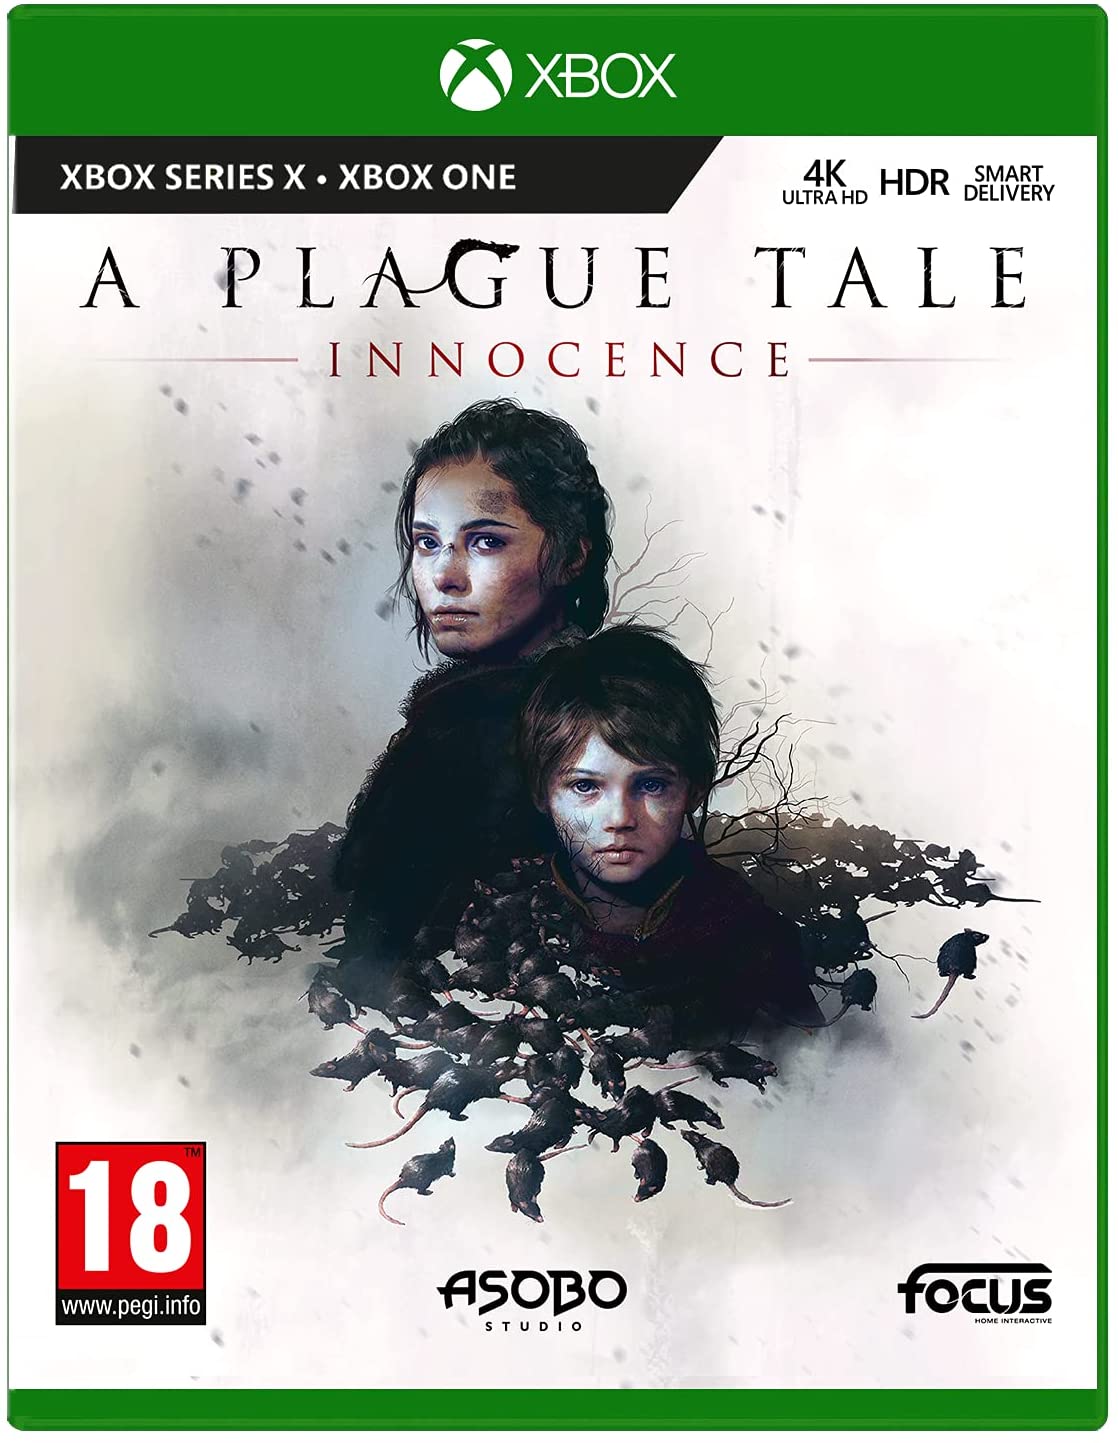 A Plague Tale Innocence - Xbox Series X and Xbox One | Yard's Games Ltd